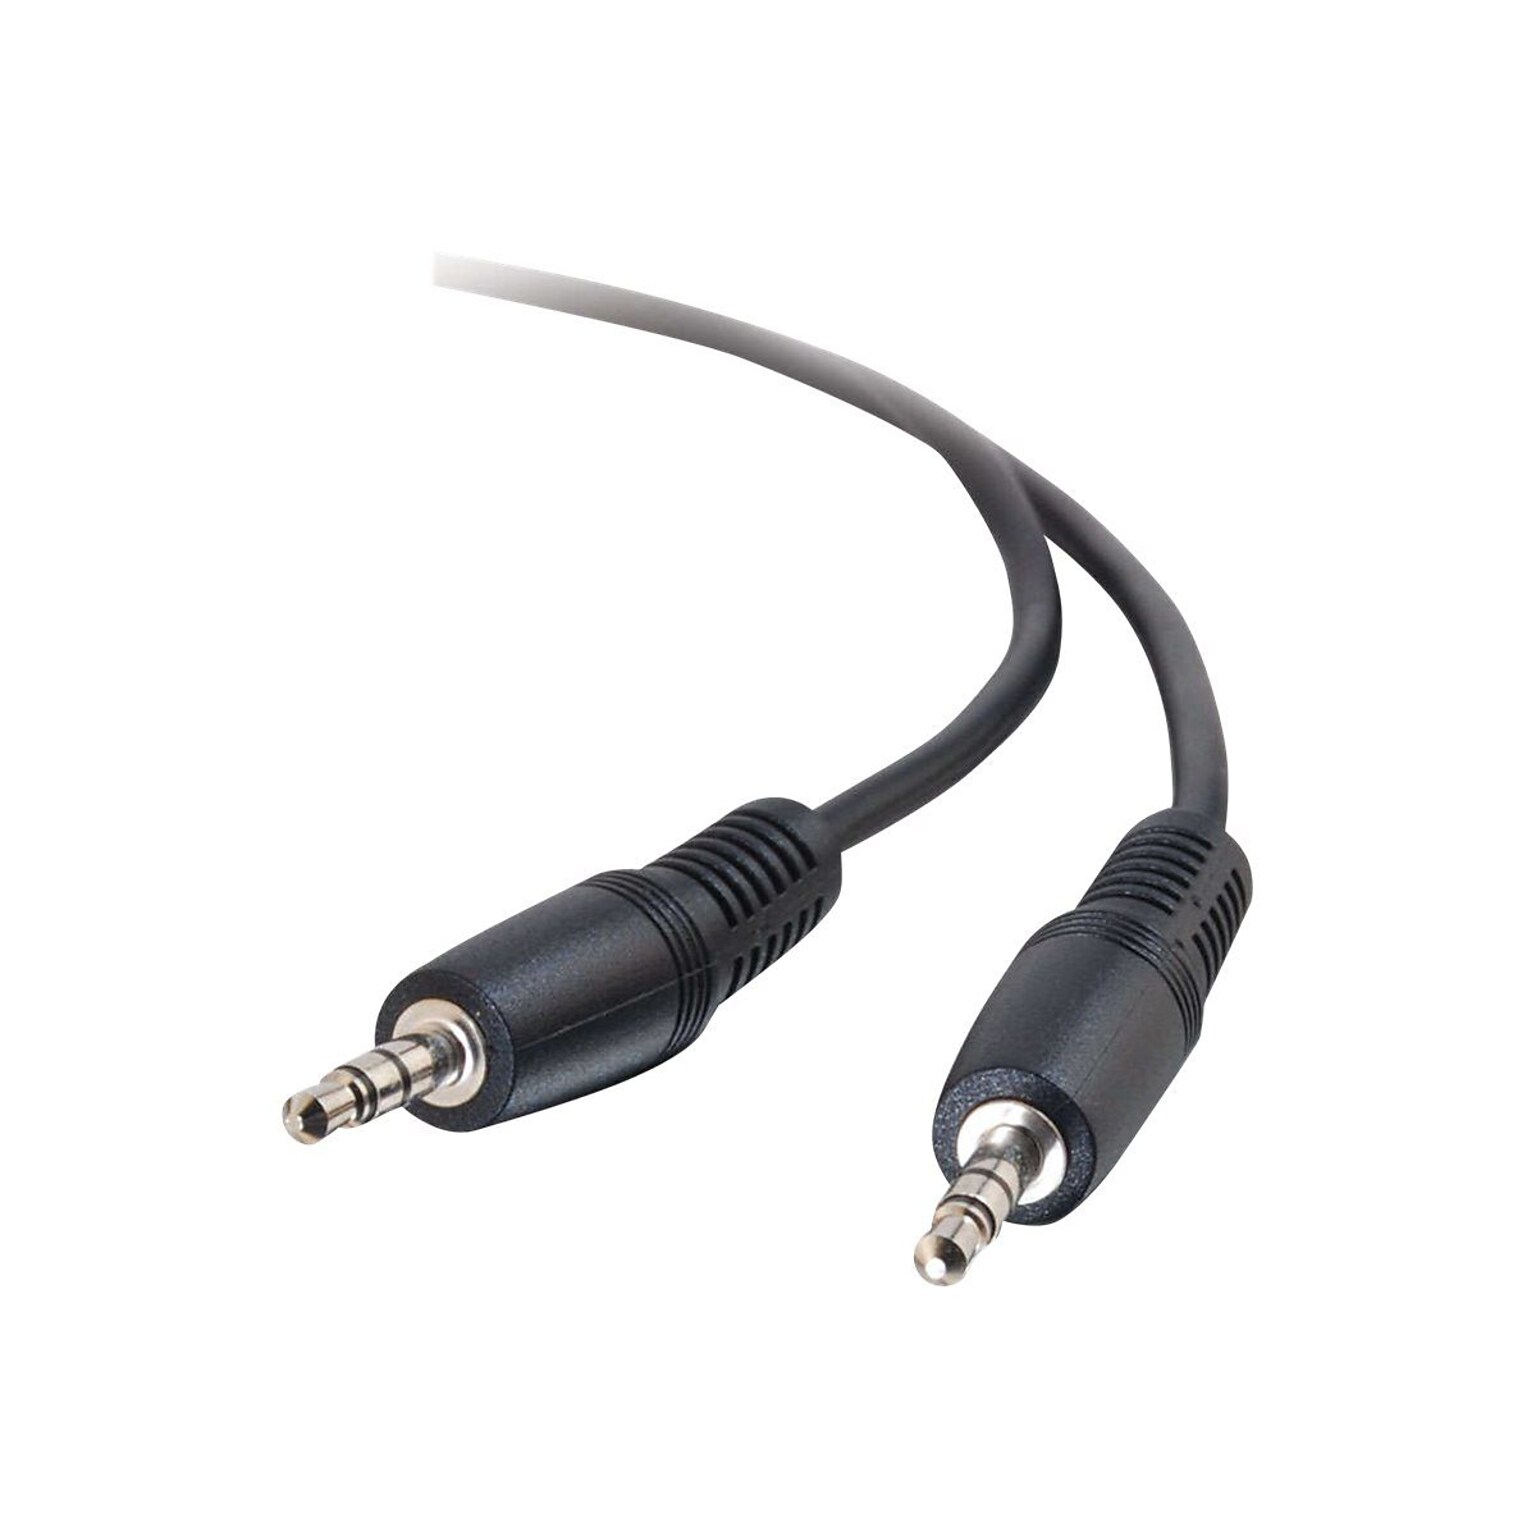 C2G® 40413 6 3.5mm Stereo Male/Female Audio Cable; Black